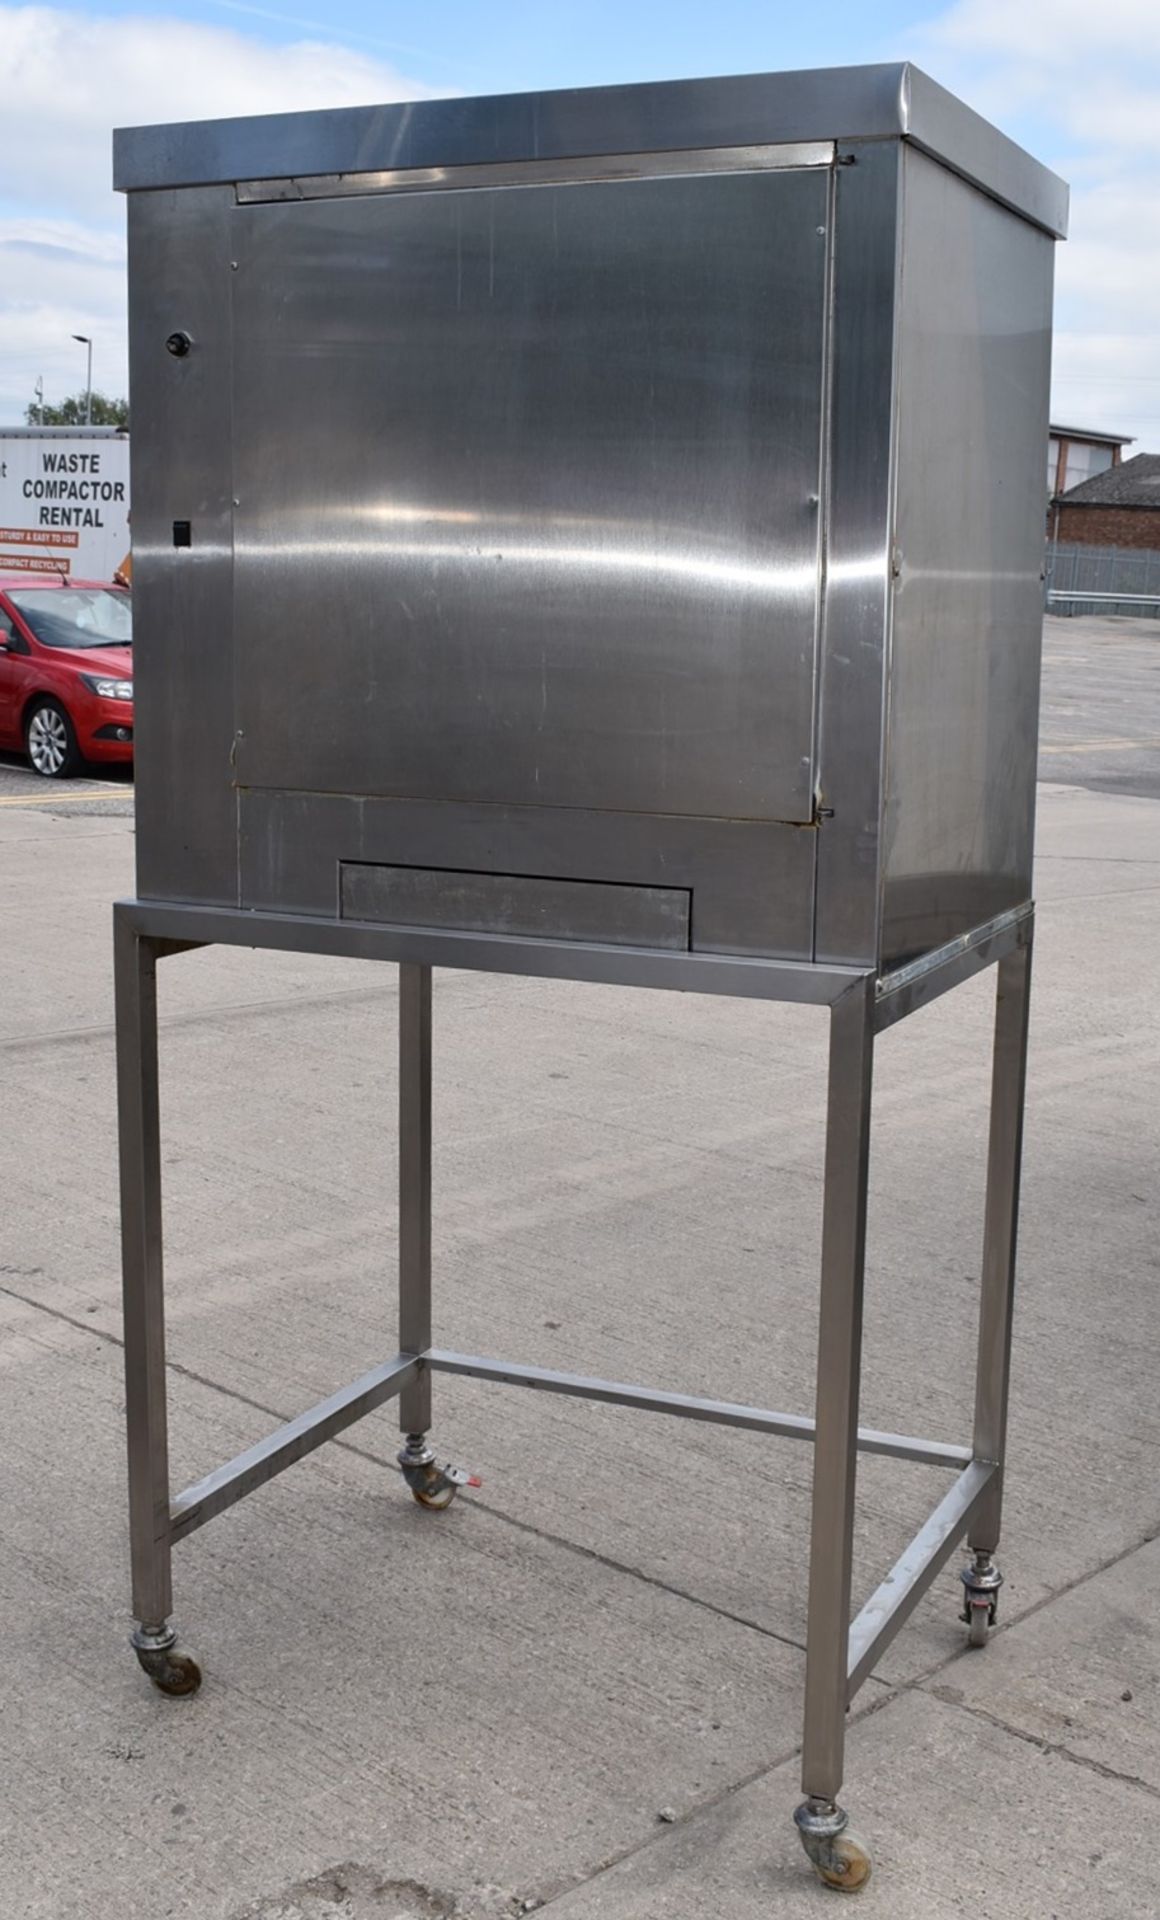 1 x BKI BBQ King Commercial Rotisserie Chicken Oven With Stand - Cooks Upto 40 Chickens - 3 Phase - Image 2 of 8